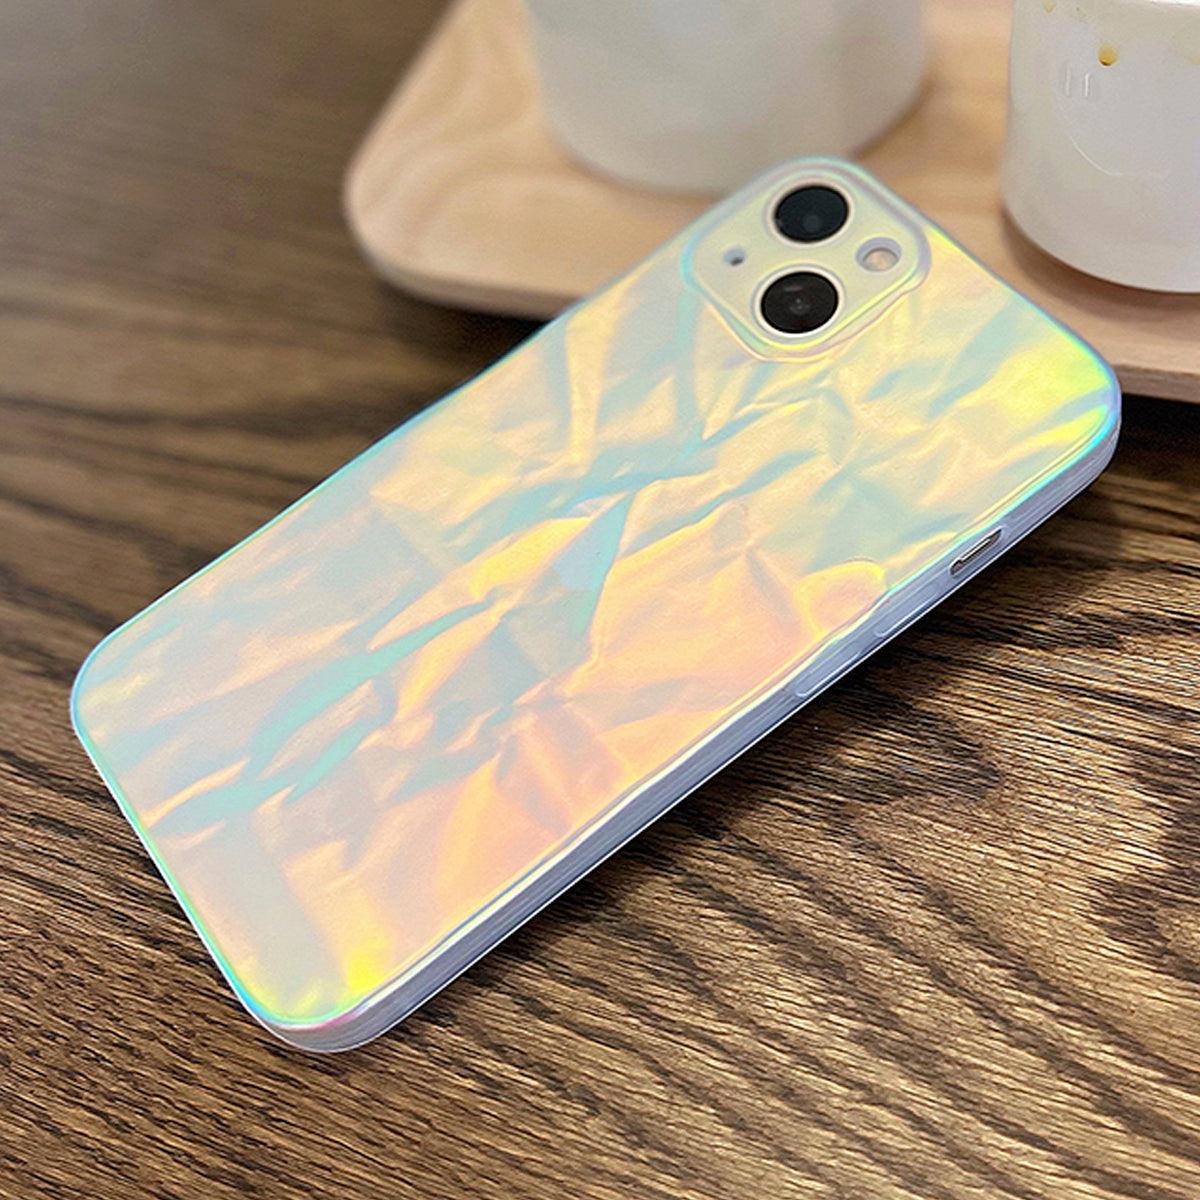 Holographic Foil Ethereal iPhone Case - Aesthetic Clothes Shop